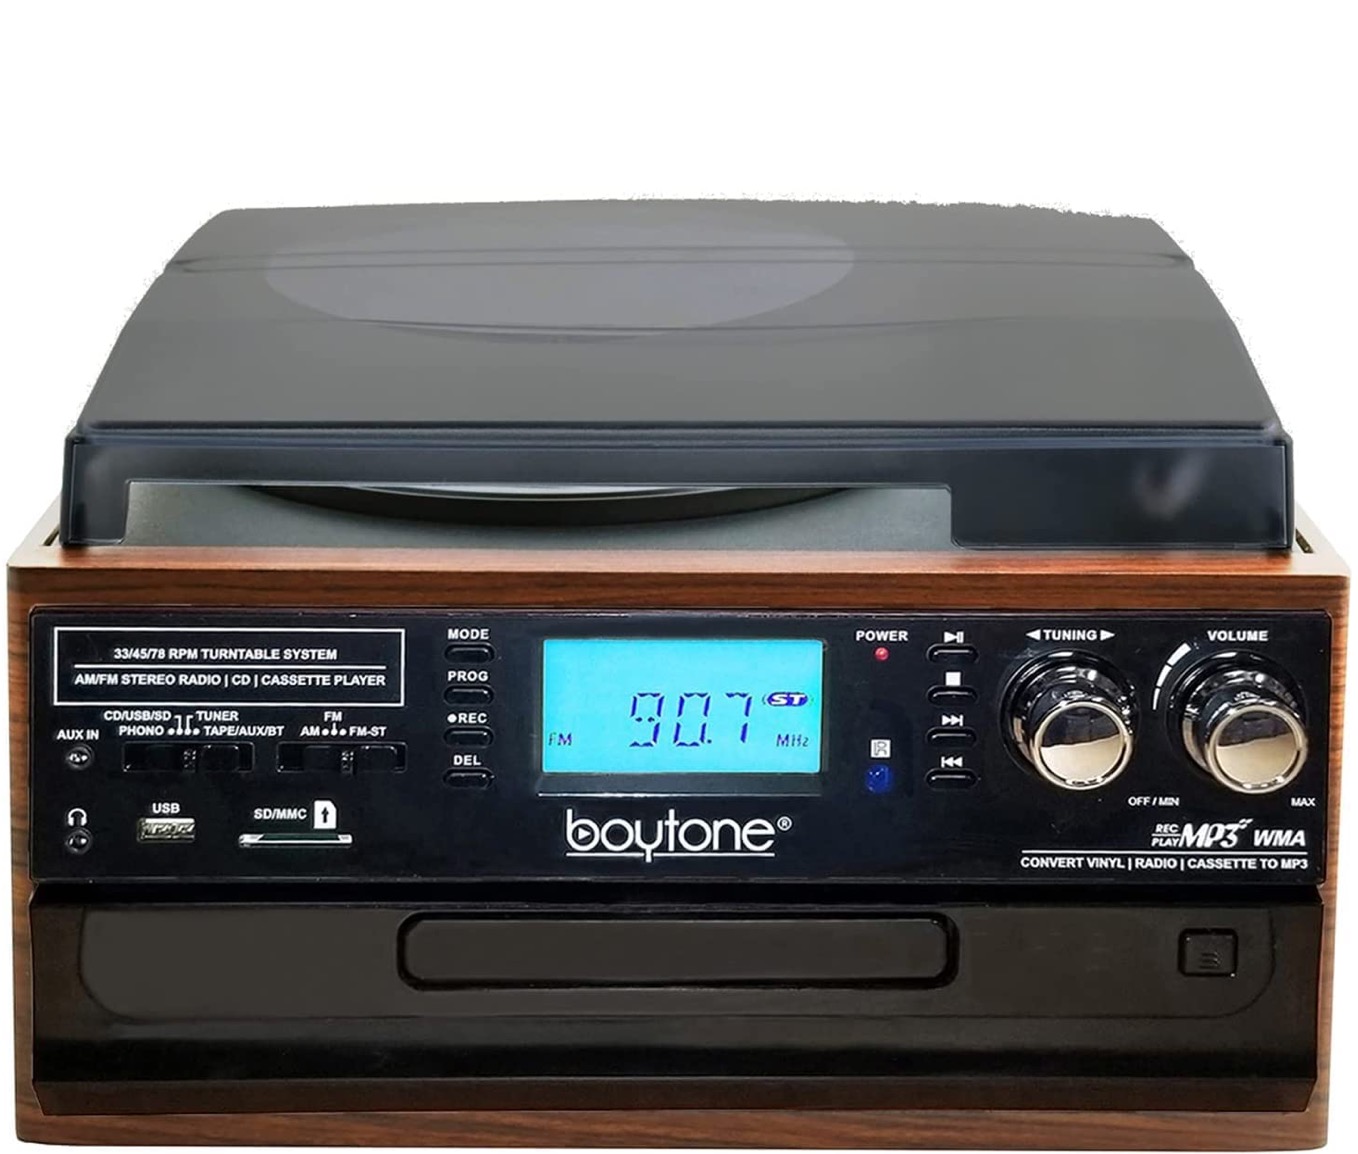 BT-22MS 9-in-1 Wireless Connection Turntable System |Boytone